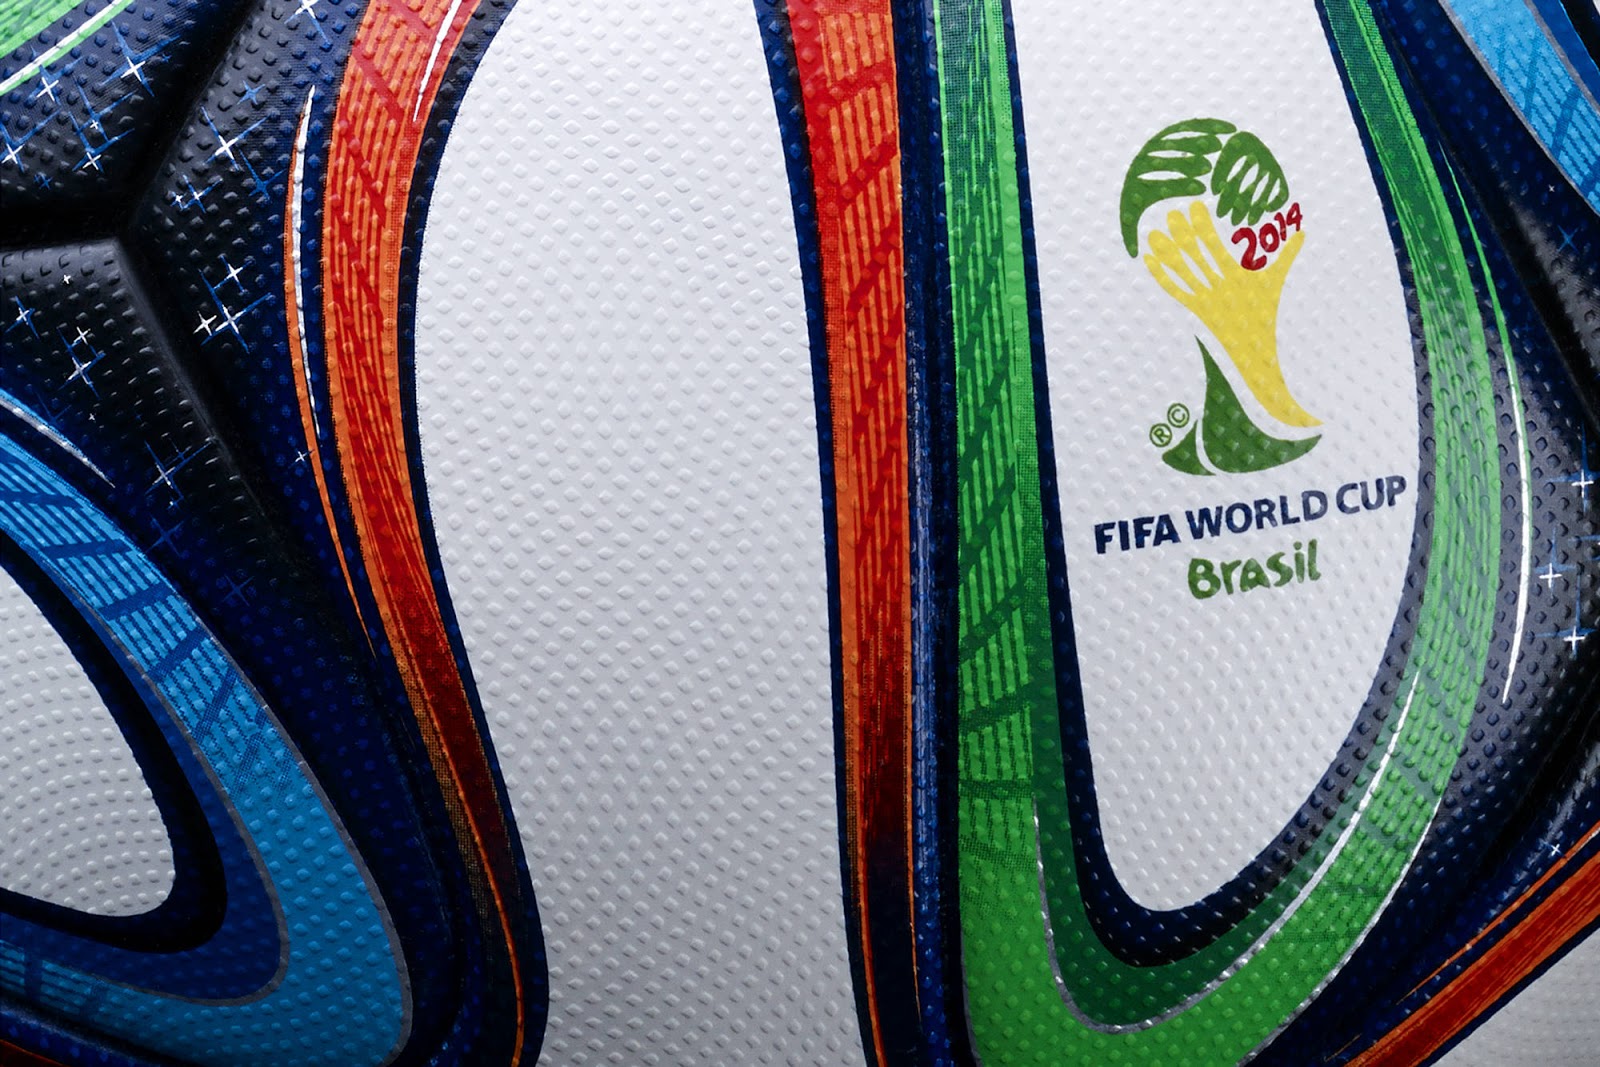 adidas Brazuca 2014 FIFA World Cup Official Match Ball - Unboxing